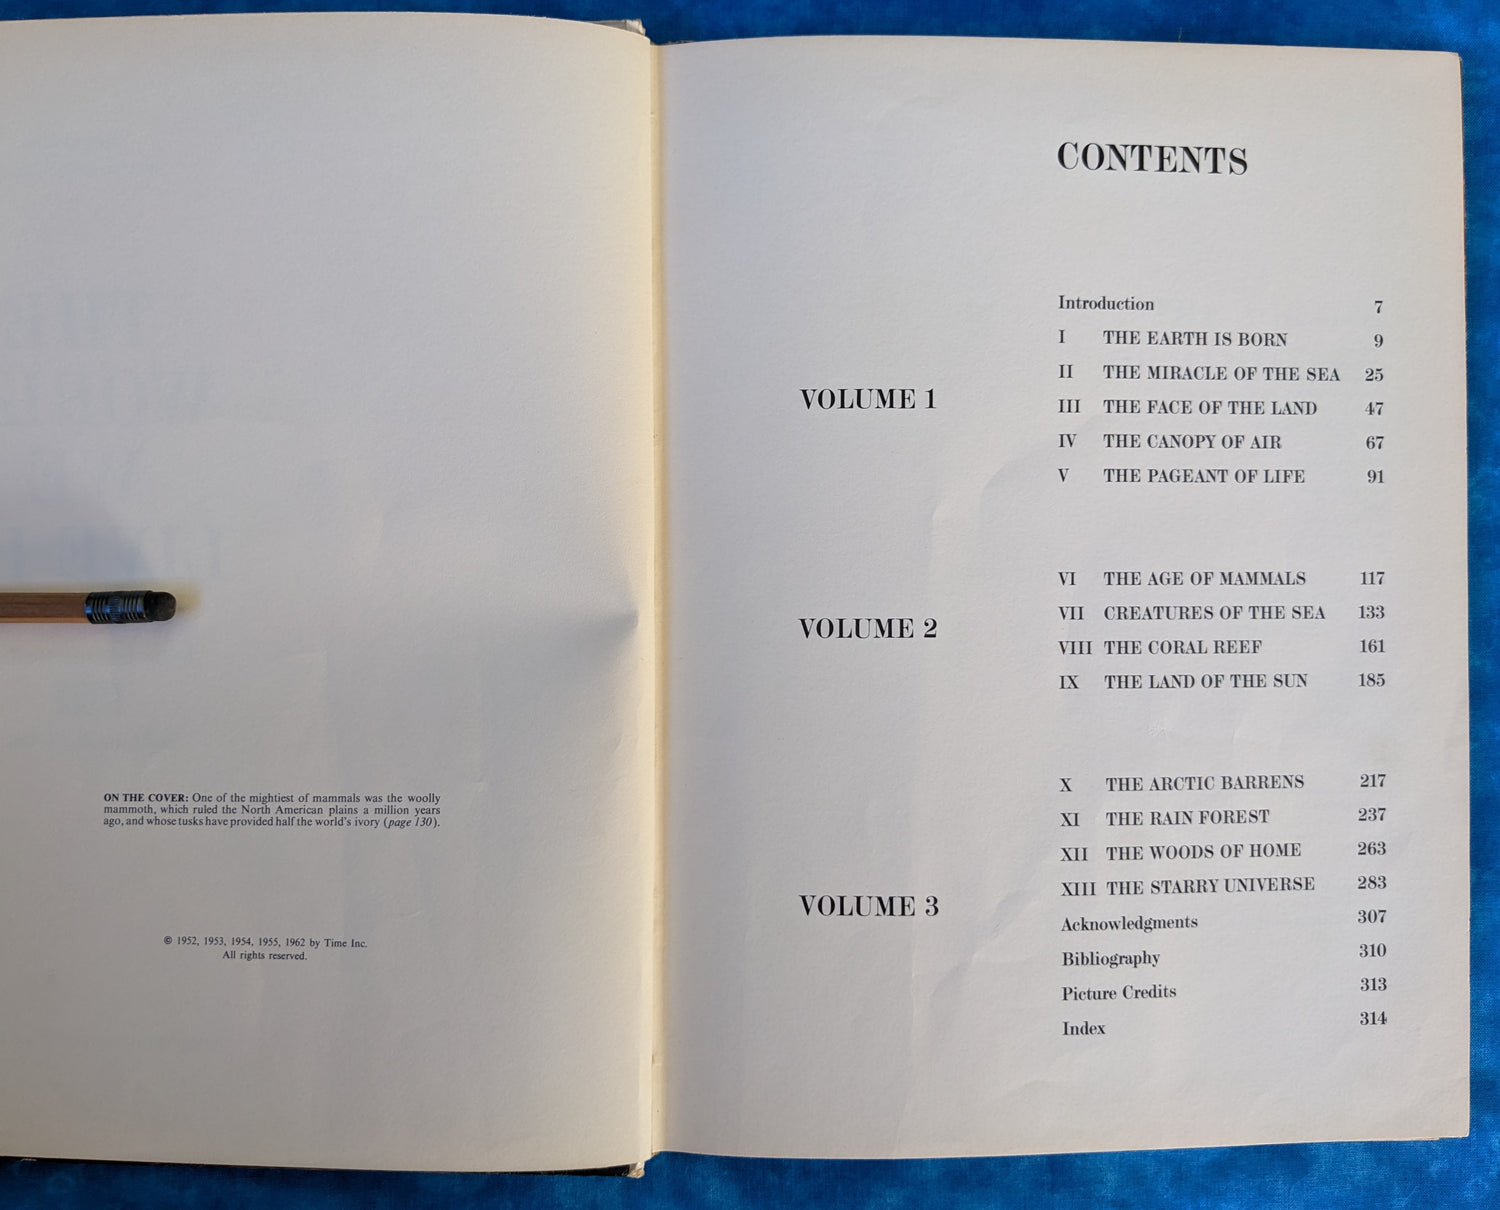 The World We Live In, Part 2: The Development of Life vintage book contents page